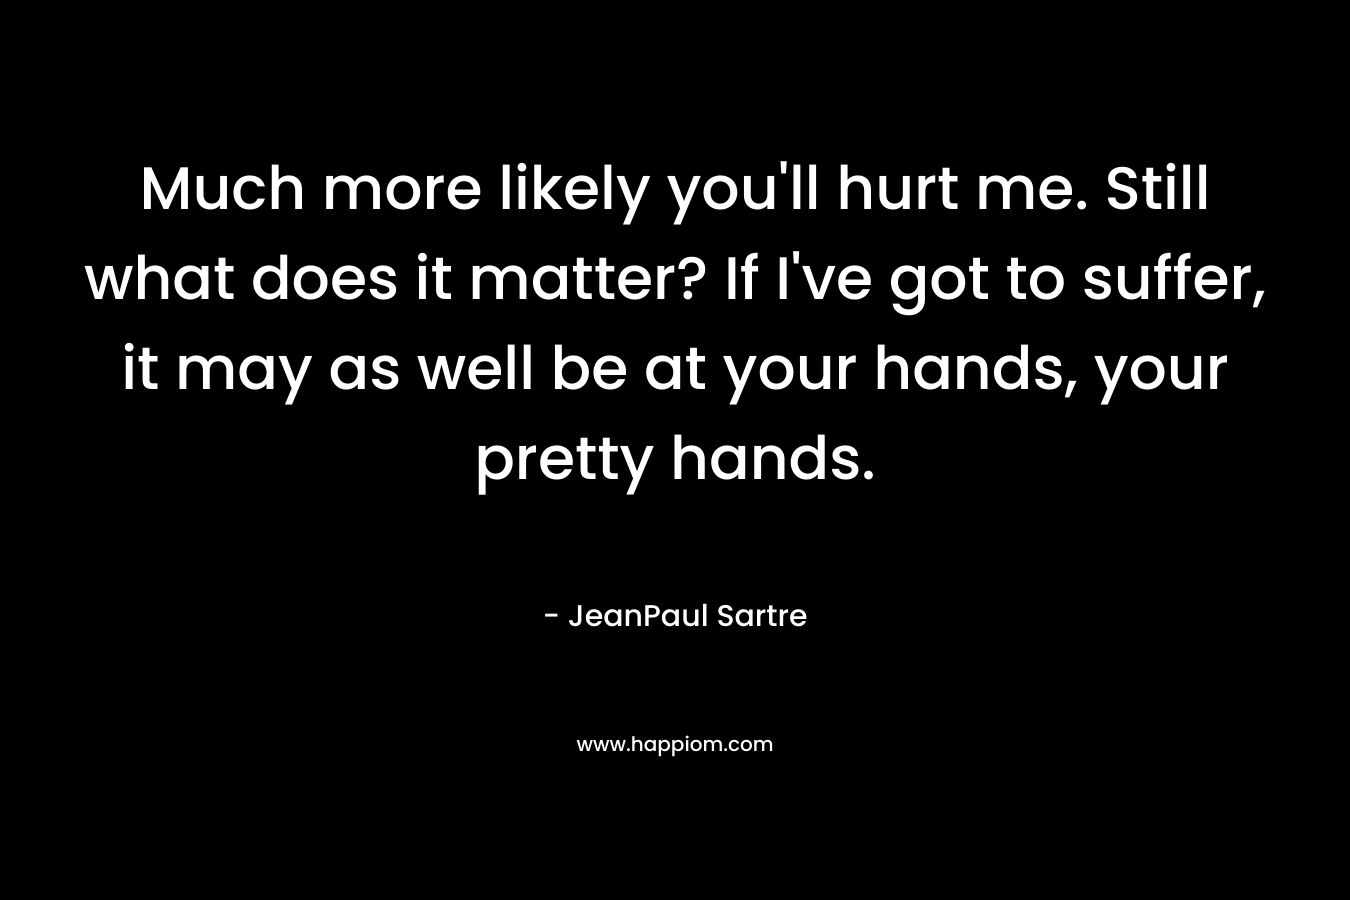 Much more likely you'll hurt me. Still what does it matter? If I've got to suffer, it may as well be at your hands, your pretty hands.